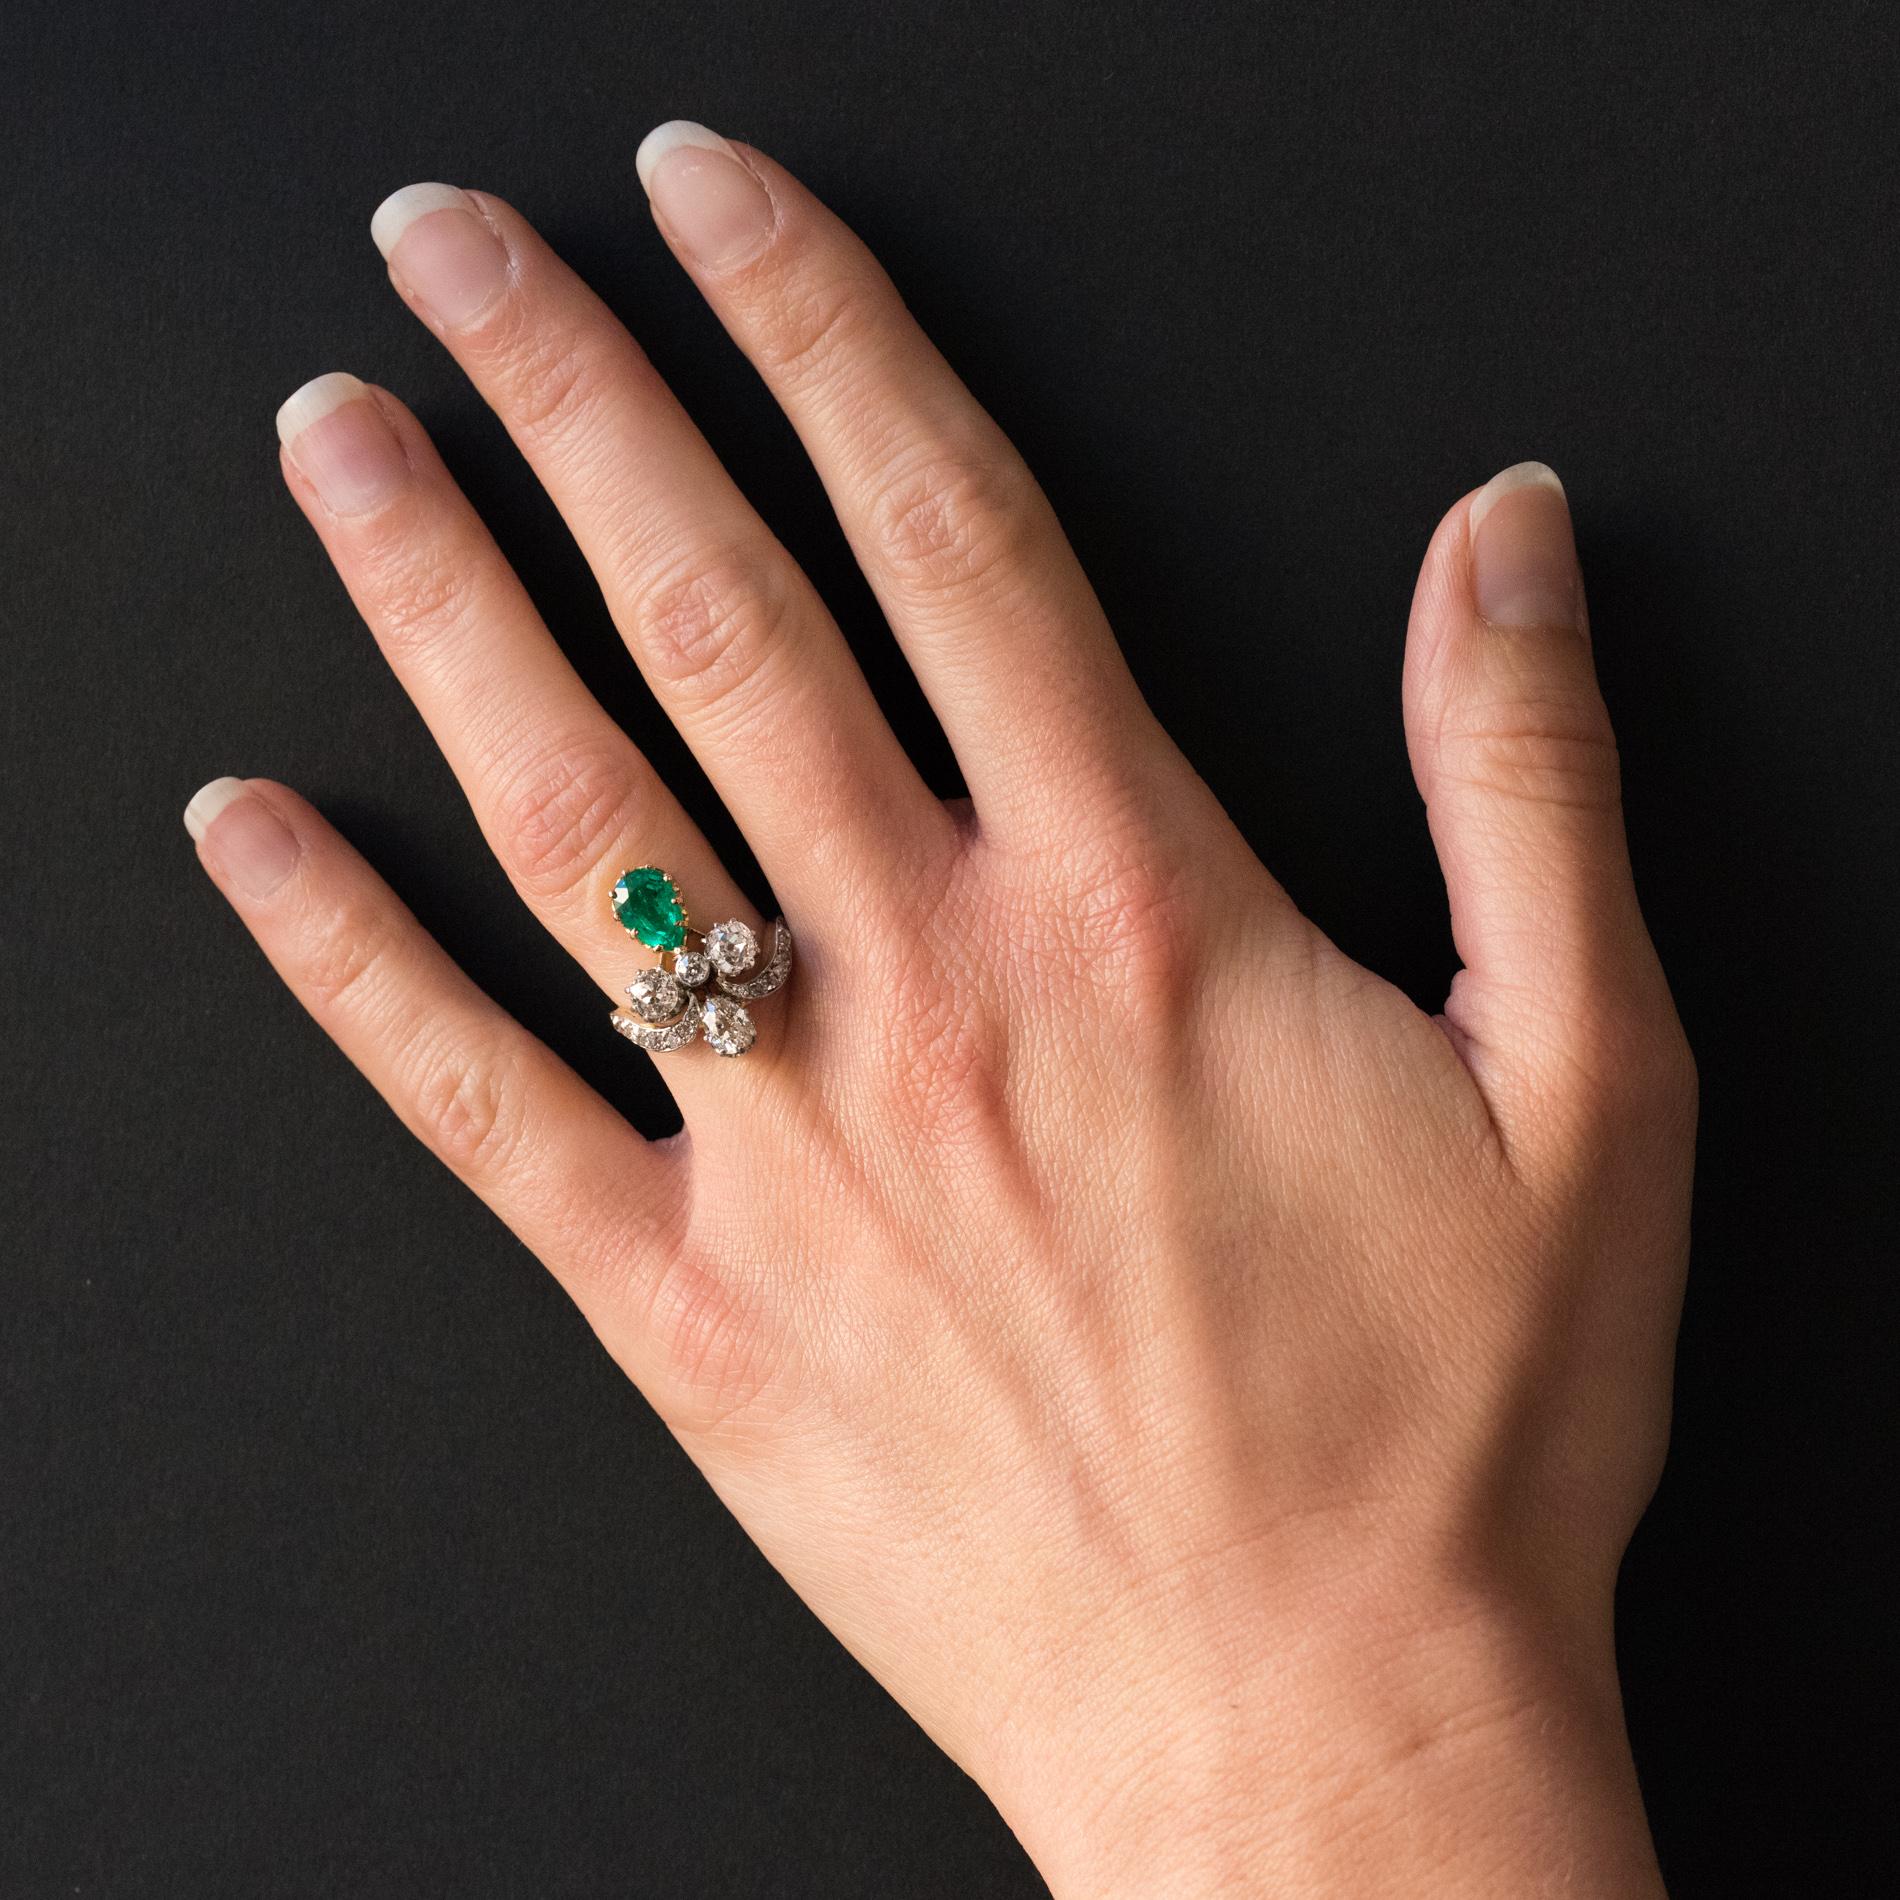 Ring in 18 carats yellow gold, eagle's head hallmark.
Called Duchess, this beautiful antique ring is set with a pear-cut emerald, himself set with claws surmounted by antique-cut diamonds cushions, shiny and pear claw-set and closed. The start of